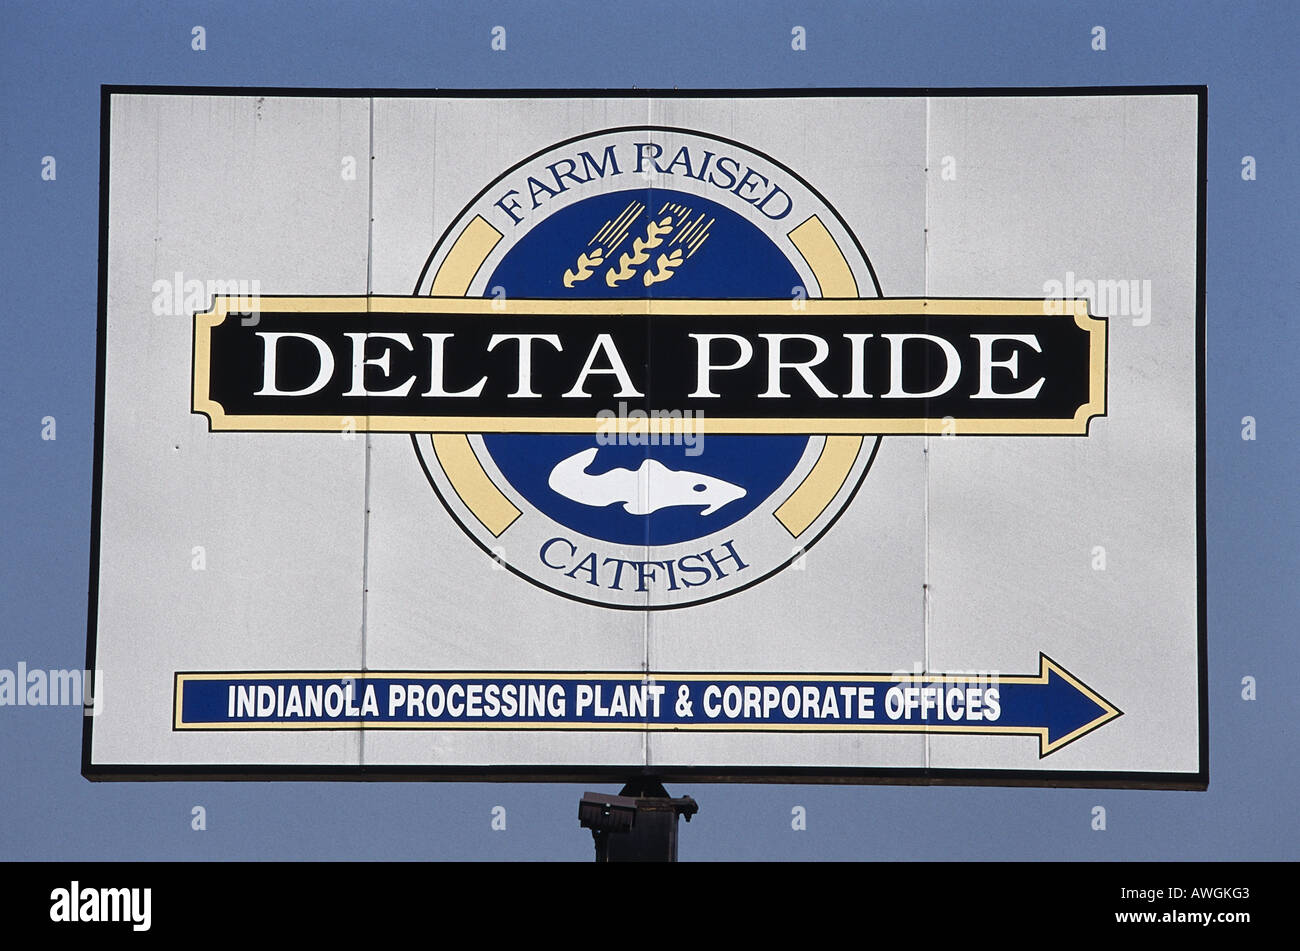 USA, Mississippi Delta, Indianola, Delta Pride, sign for largest catfish processing company in Mississippi Stock Photo